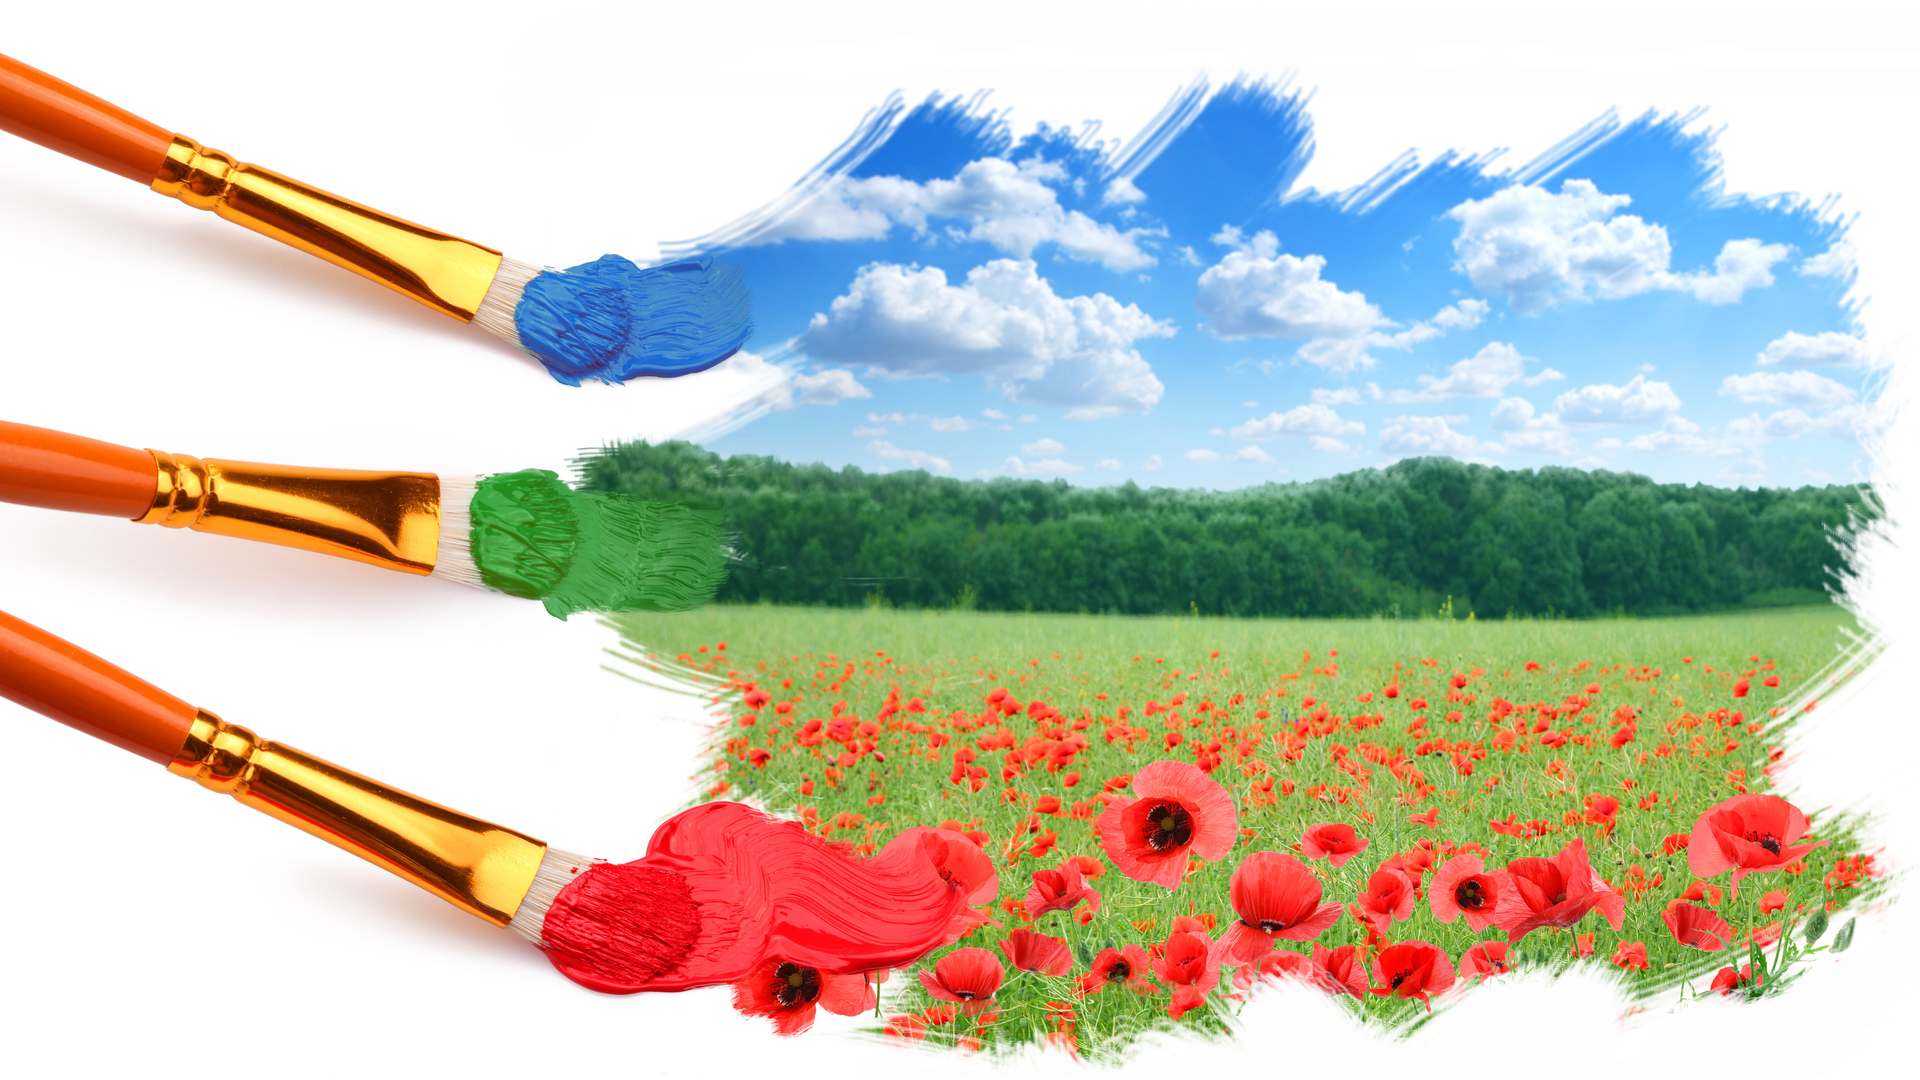 Clouds Sky Forest Field Poppies Landscape Painters Brush Painting Digital Art Photo Manipulation 1920x1080